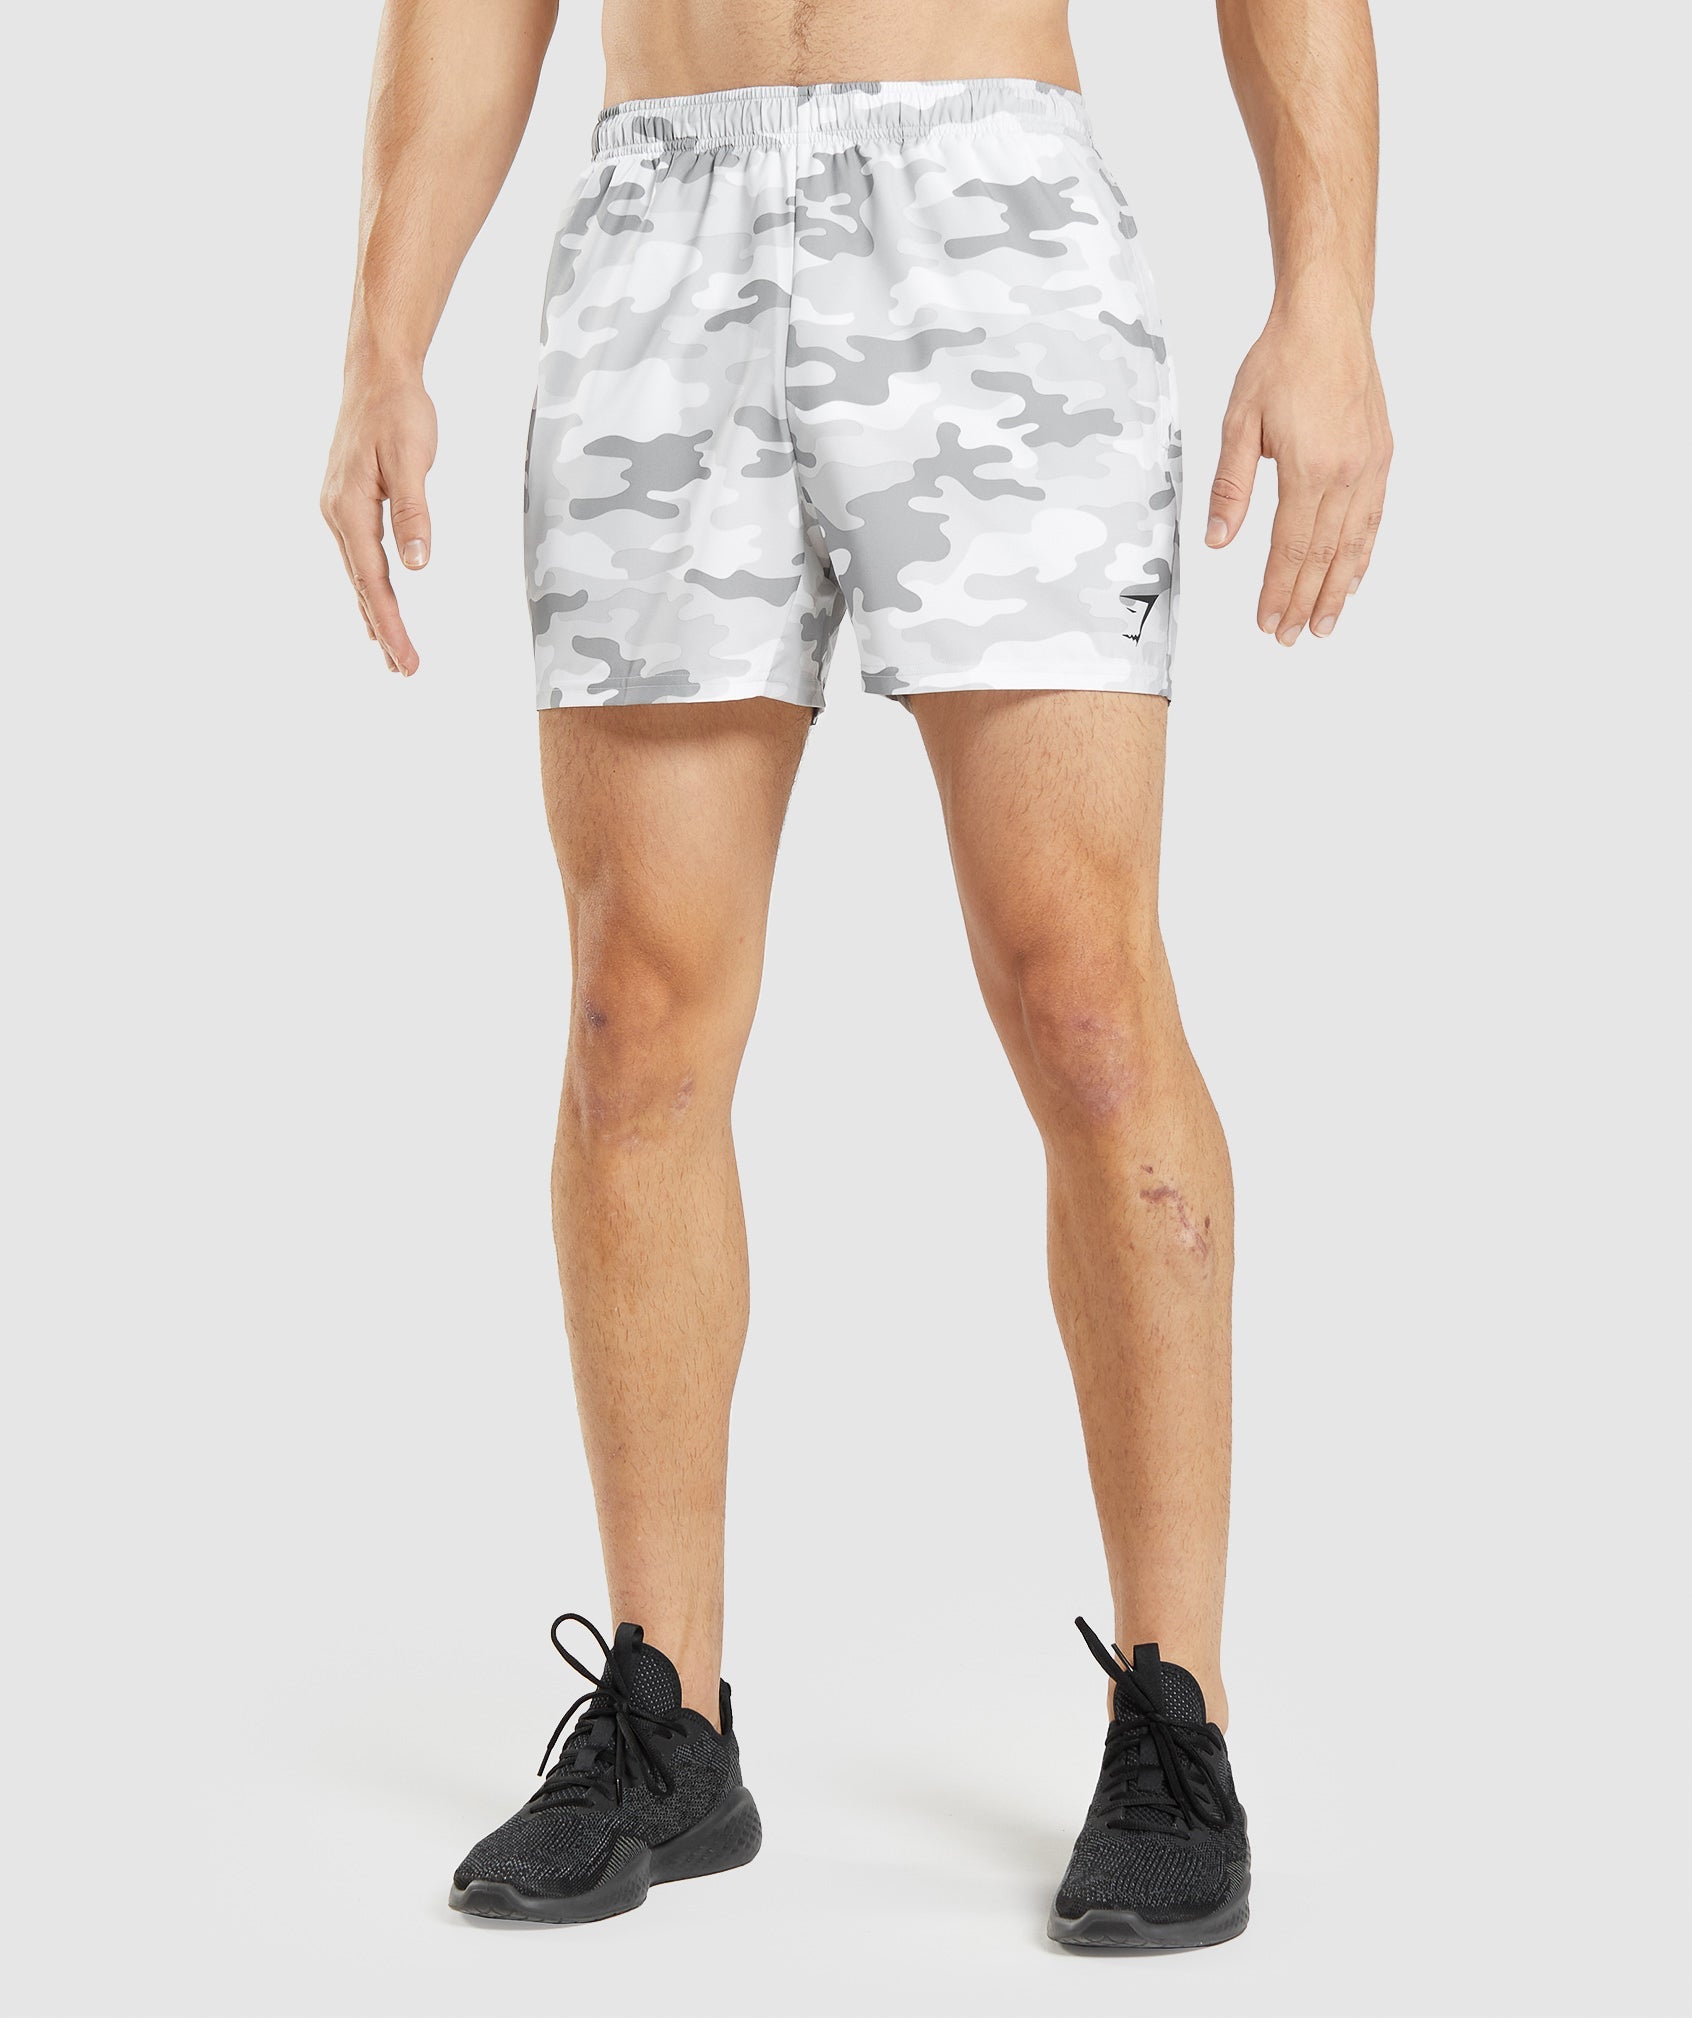 Arrival 5" Shorts in Light Grey Print - view 1